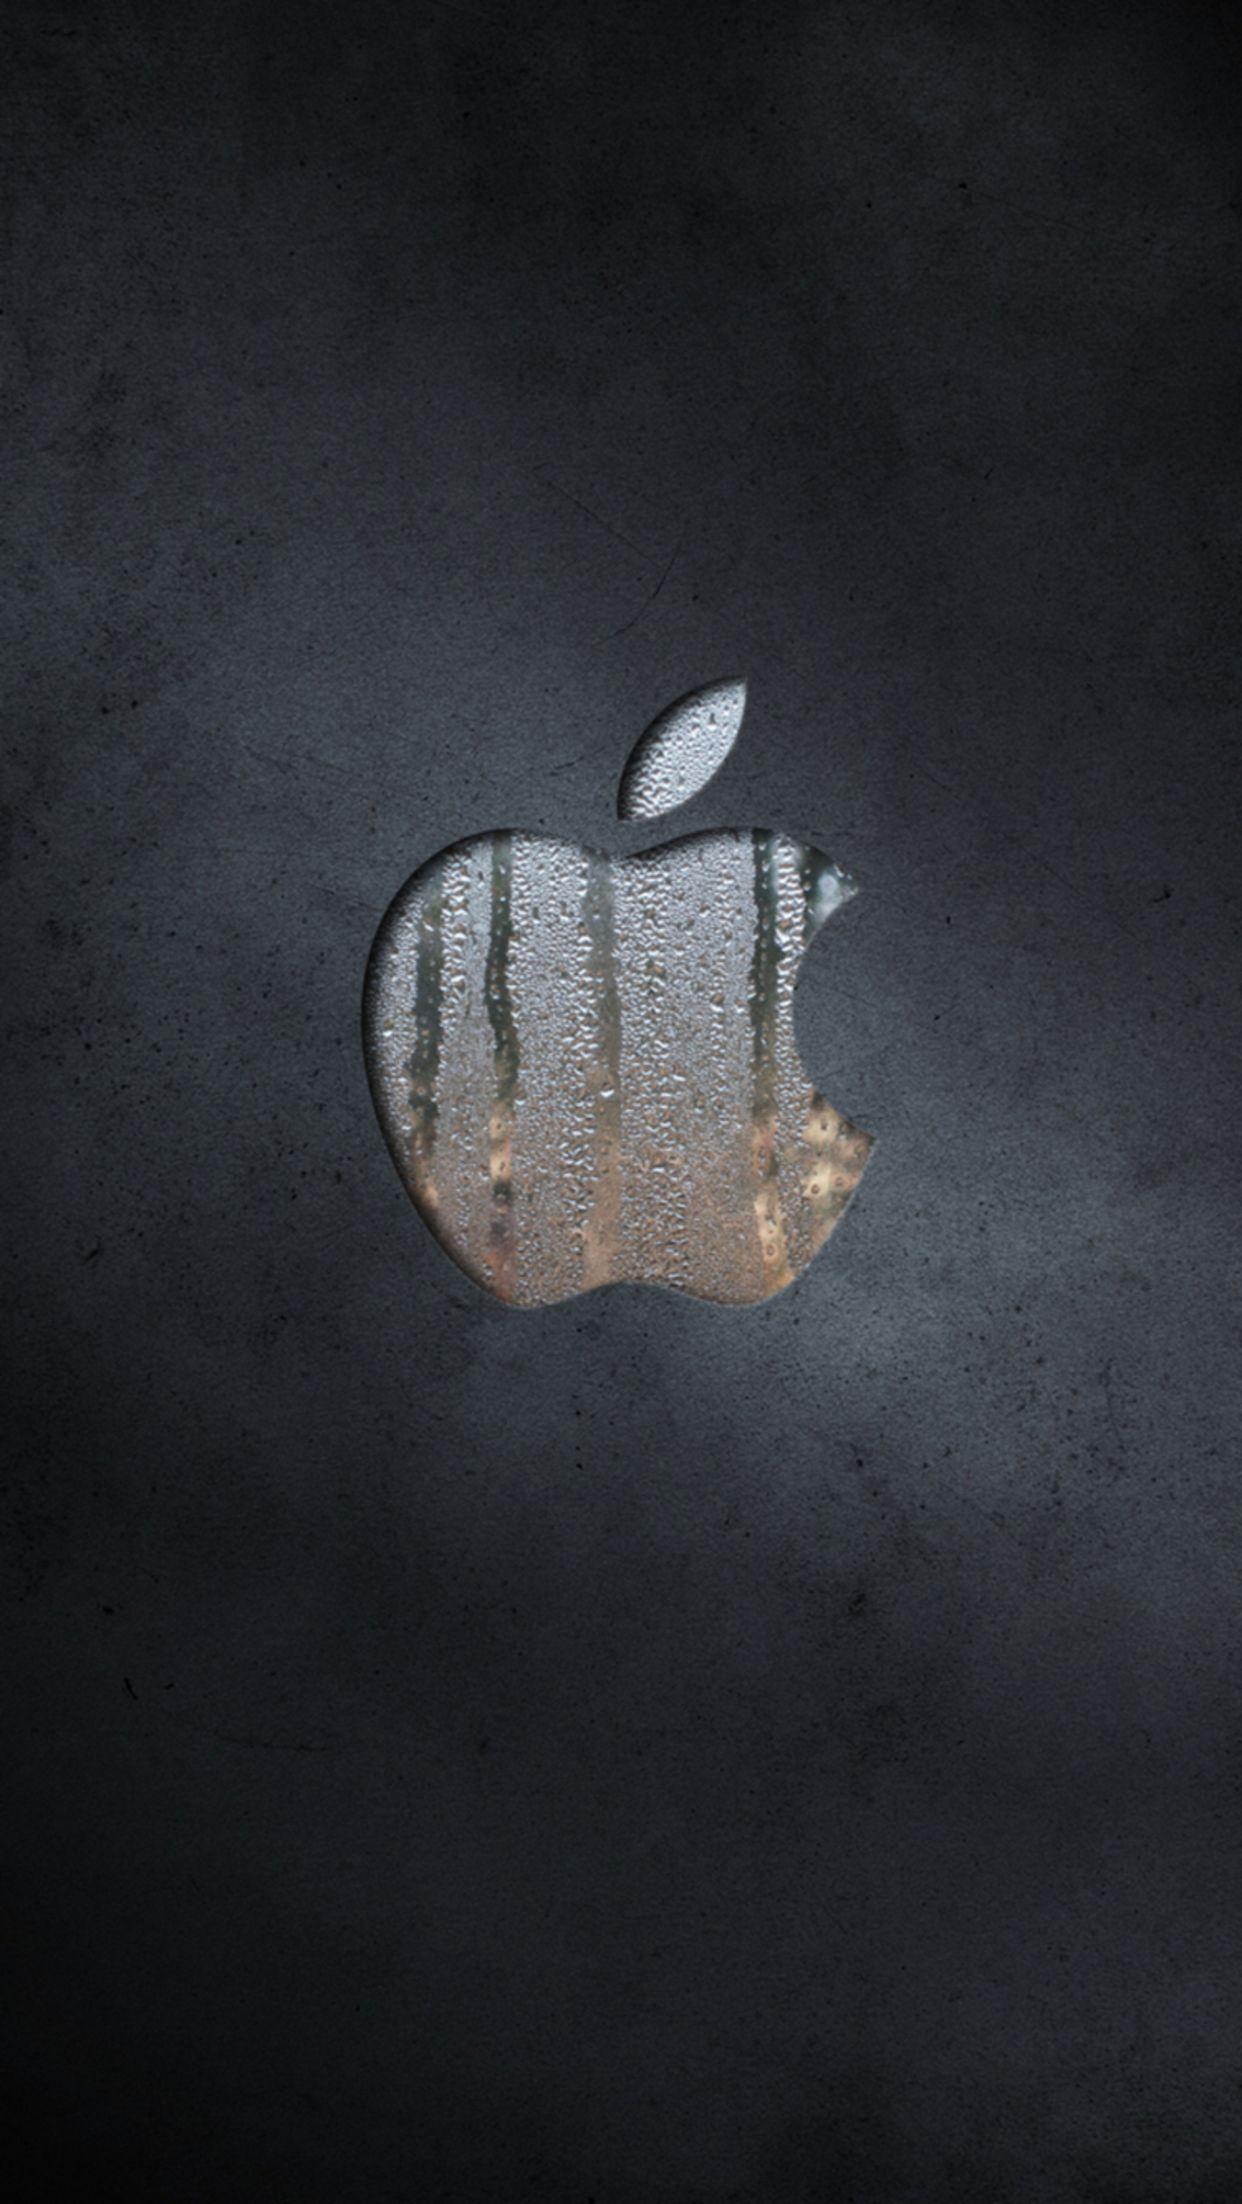 43+ Awesome Apple Logo Wallpaper 4K For Iphone - Phone Wallpapers for Boys